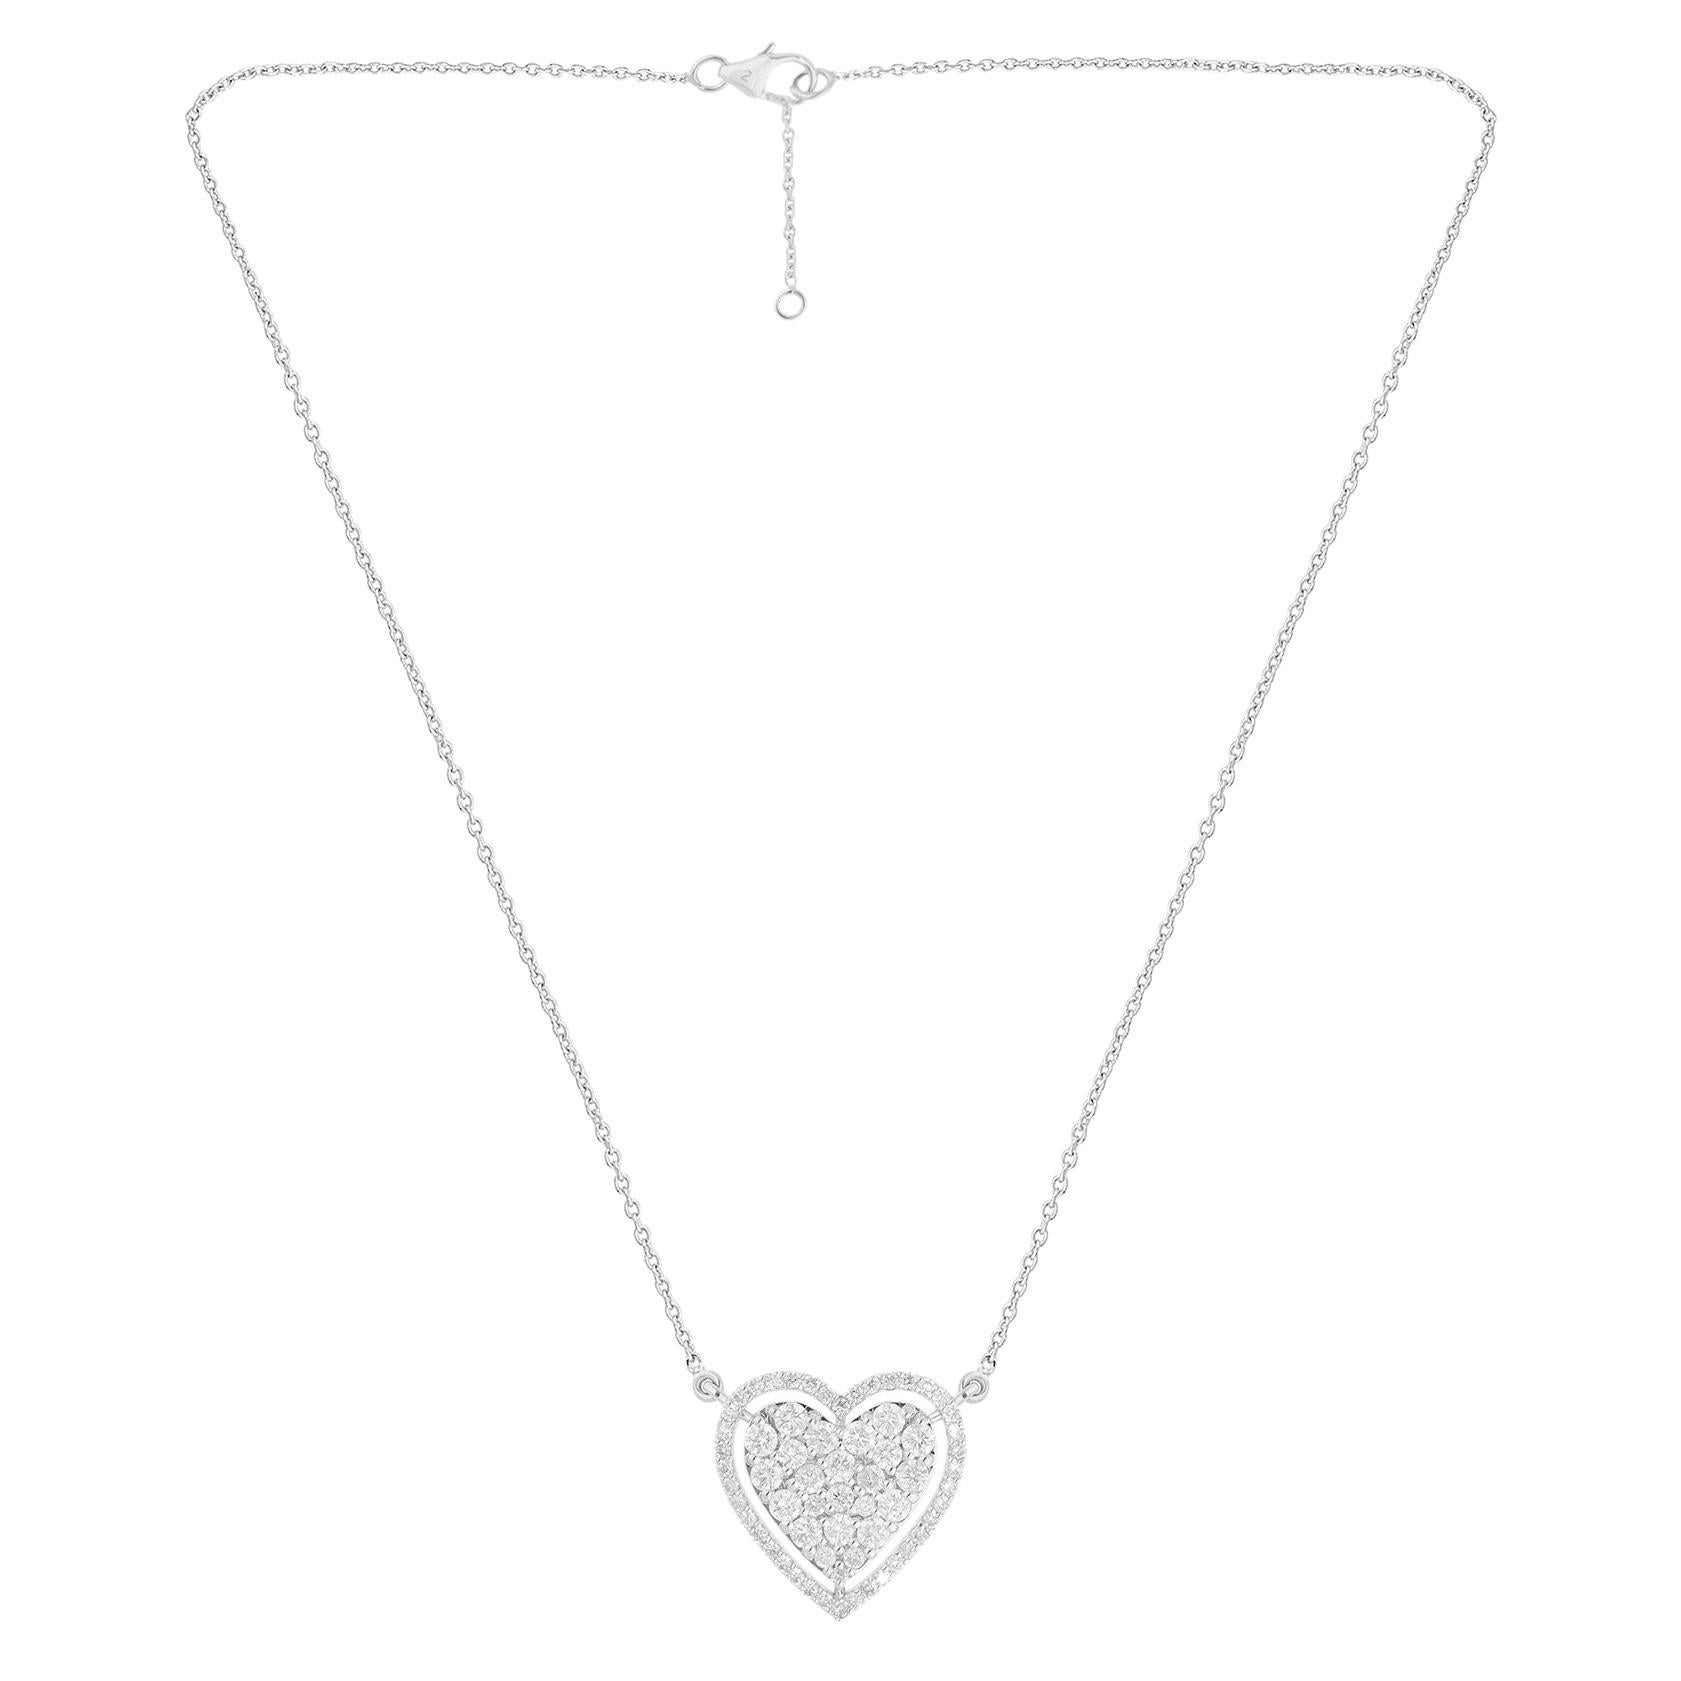 Natural 1.31 Carat Diamond Pave Heart Charm Necklace 18 Karat White Gold Jewelry For Sale